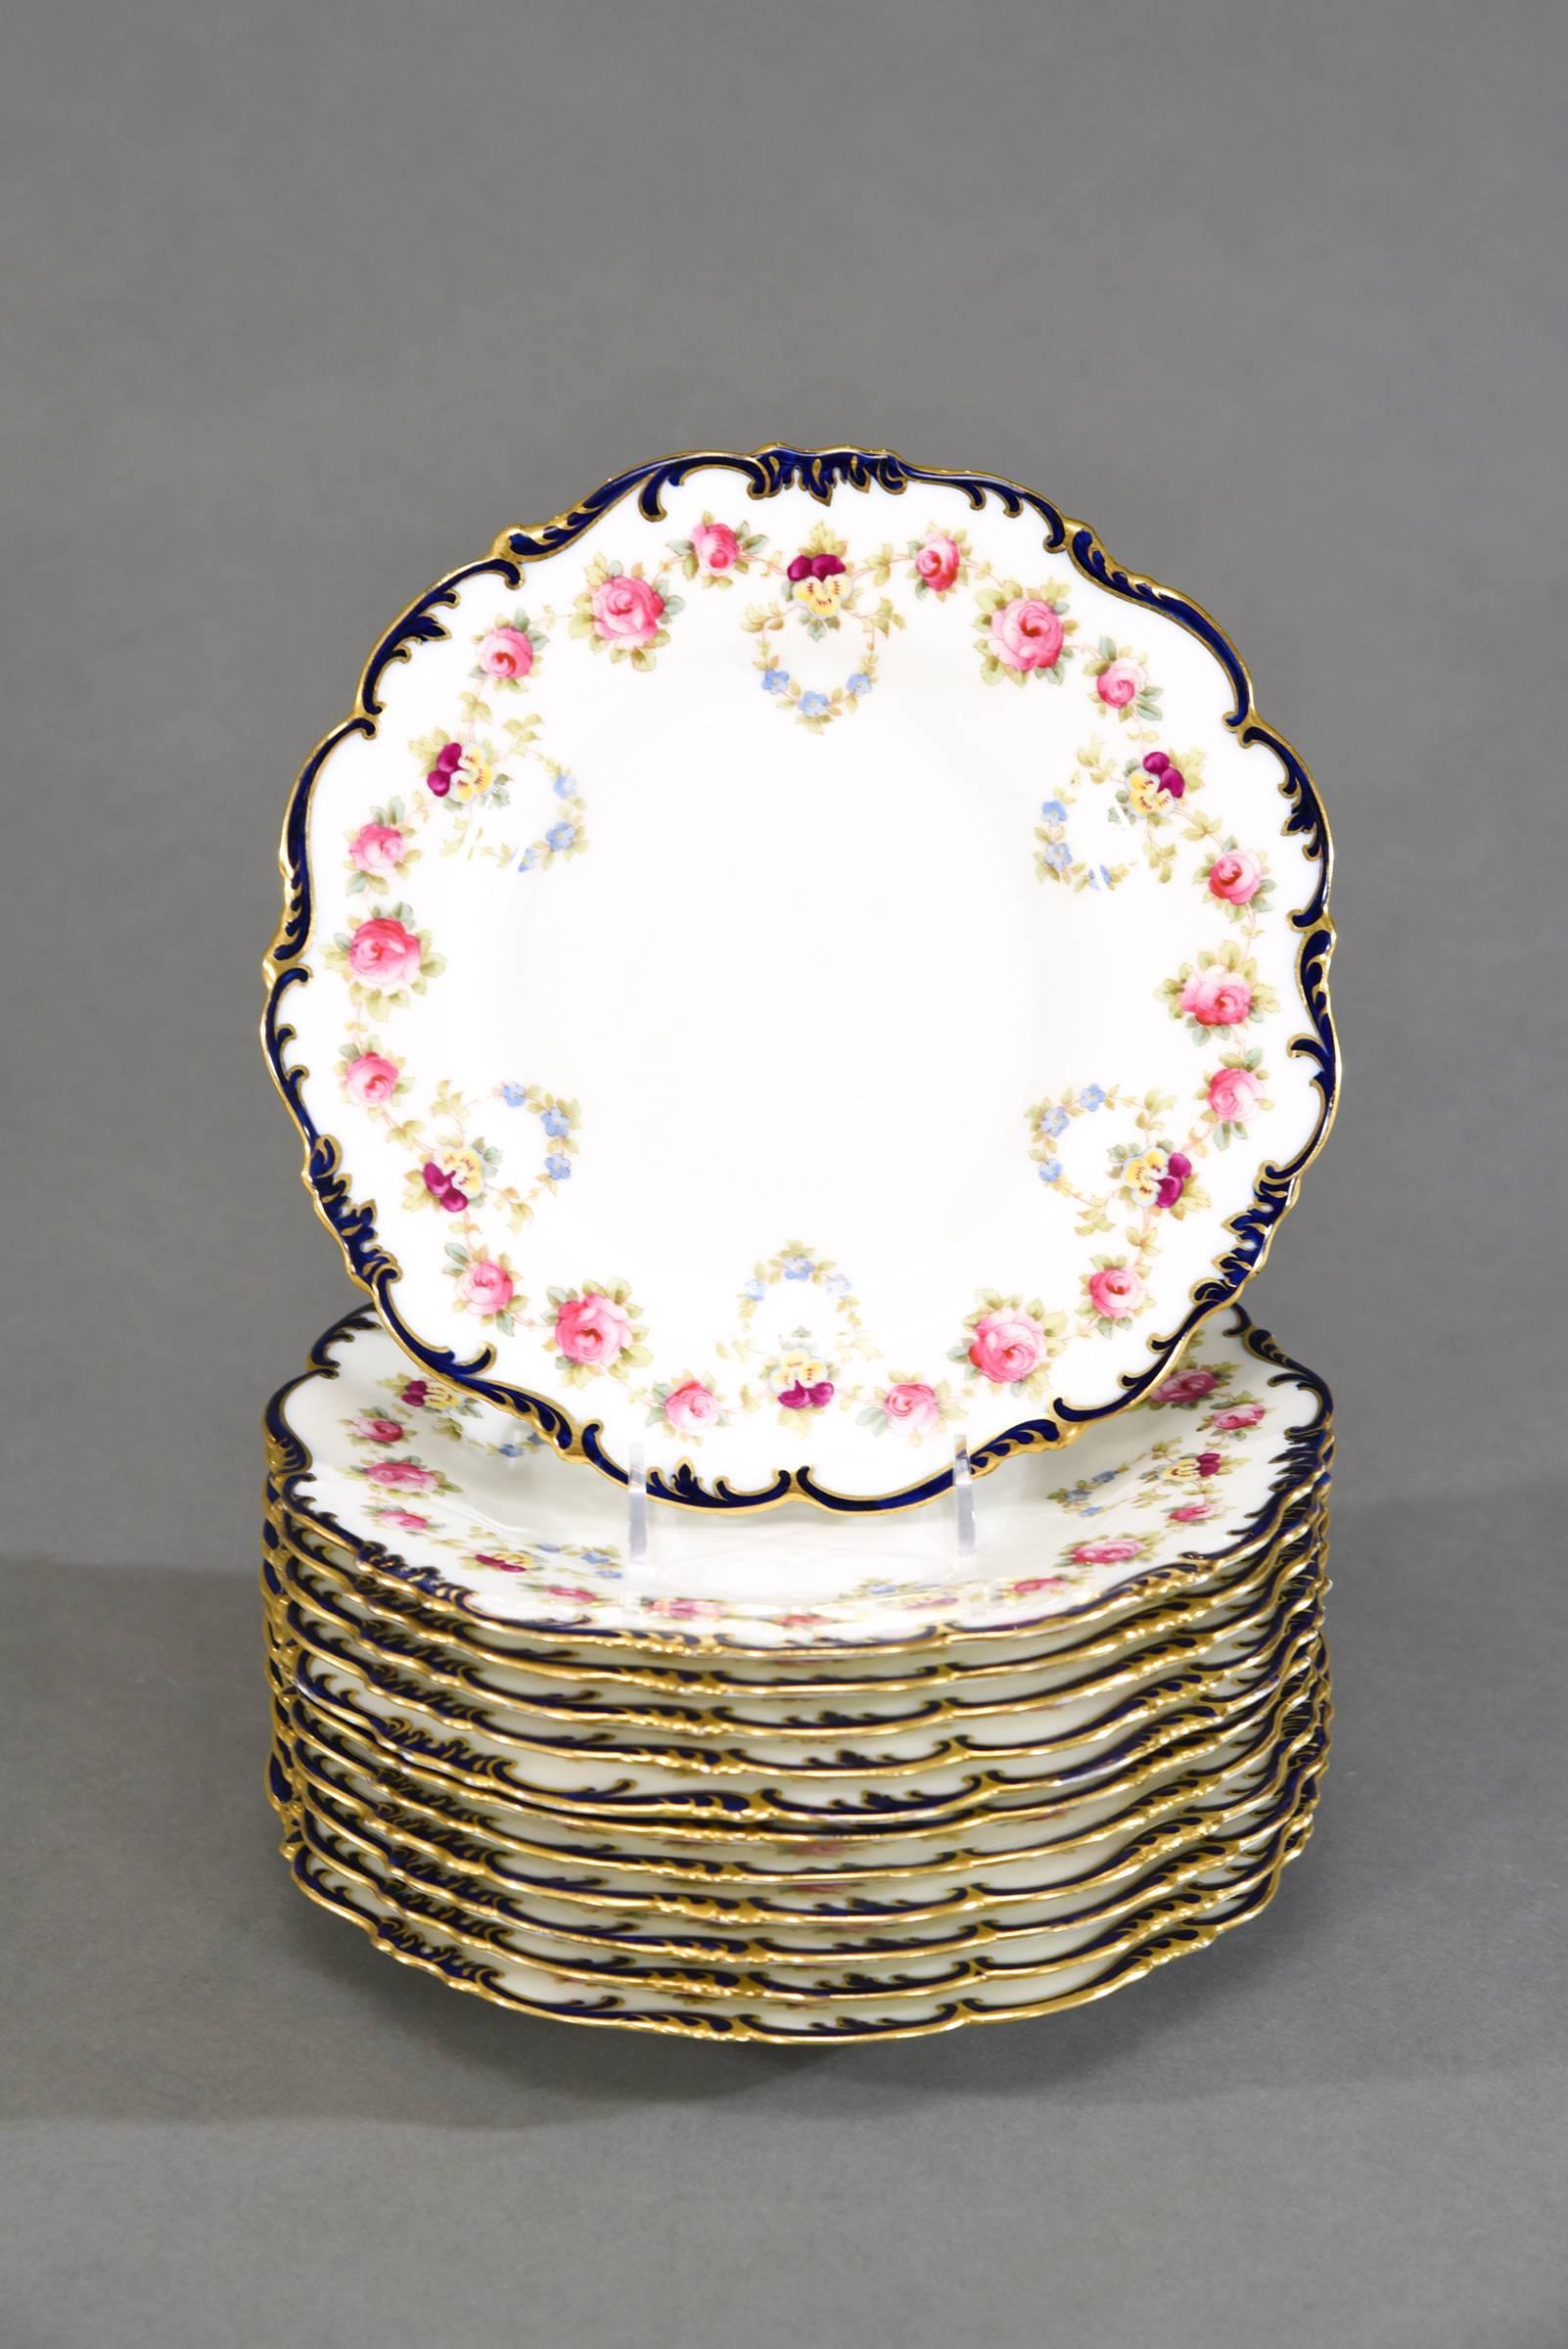 This is a complete dessert set that includes 16 pieces made by Cauldon, England. There are 12 Dessert Plates measuring 8.75 x .75, a round serving bowl, 2 oval bowls and a footed tazza. This combination offers a wonderful selection for 1st course to